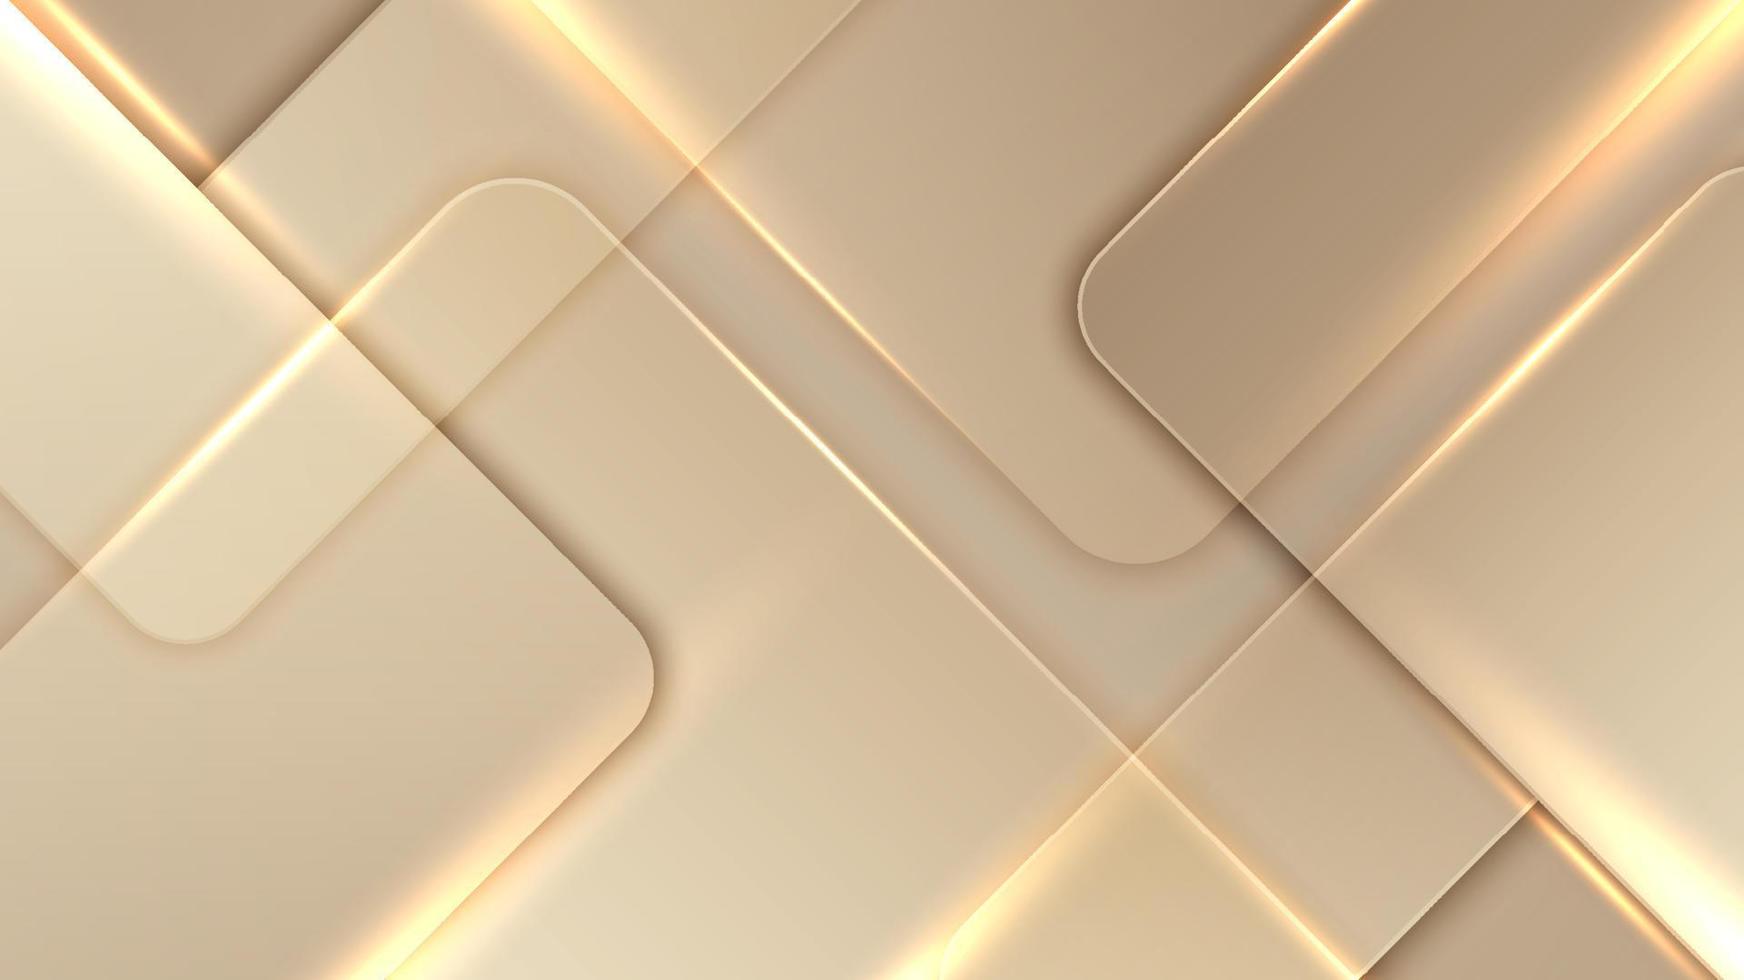 Abstract elegant golden transparent squares pattern overlapping layer with lighting effect background modern luxury style vector